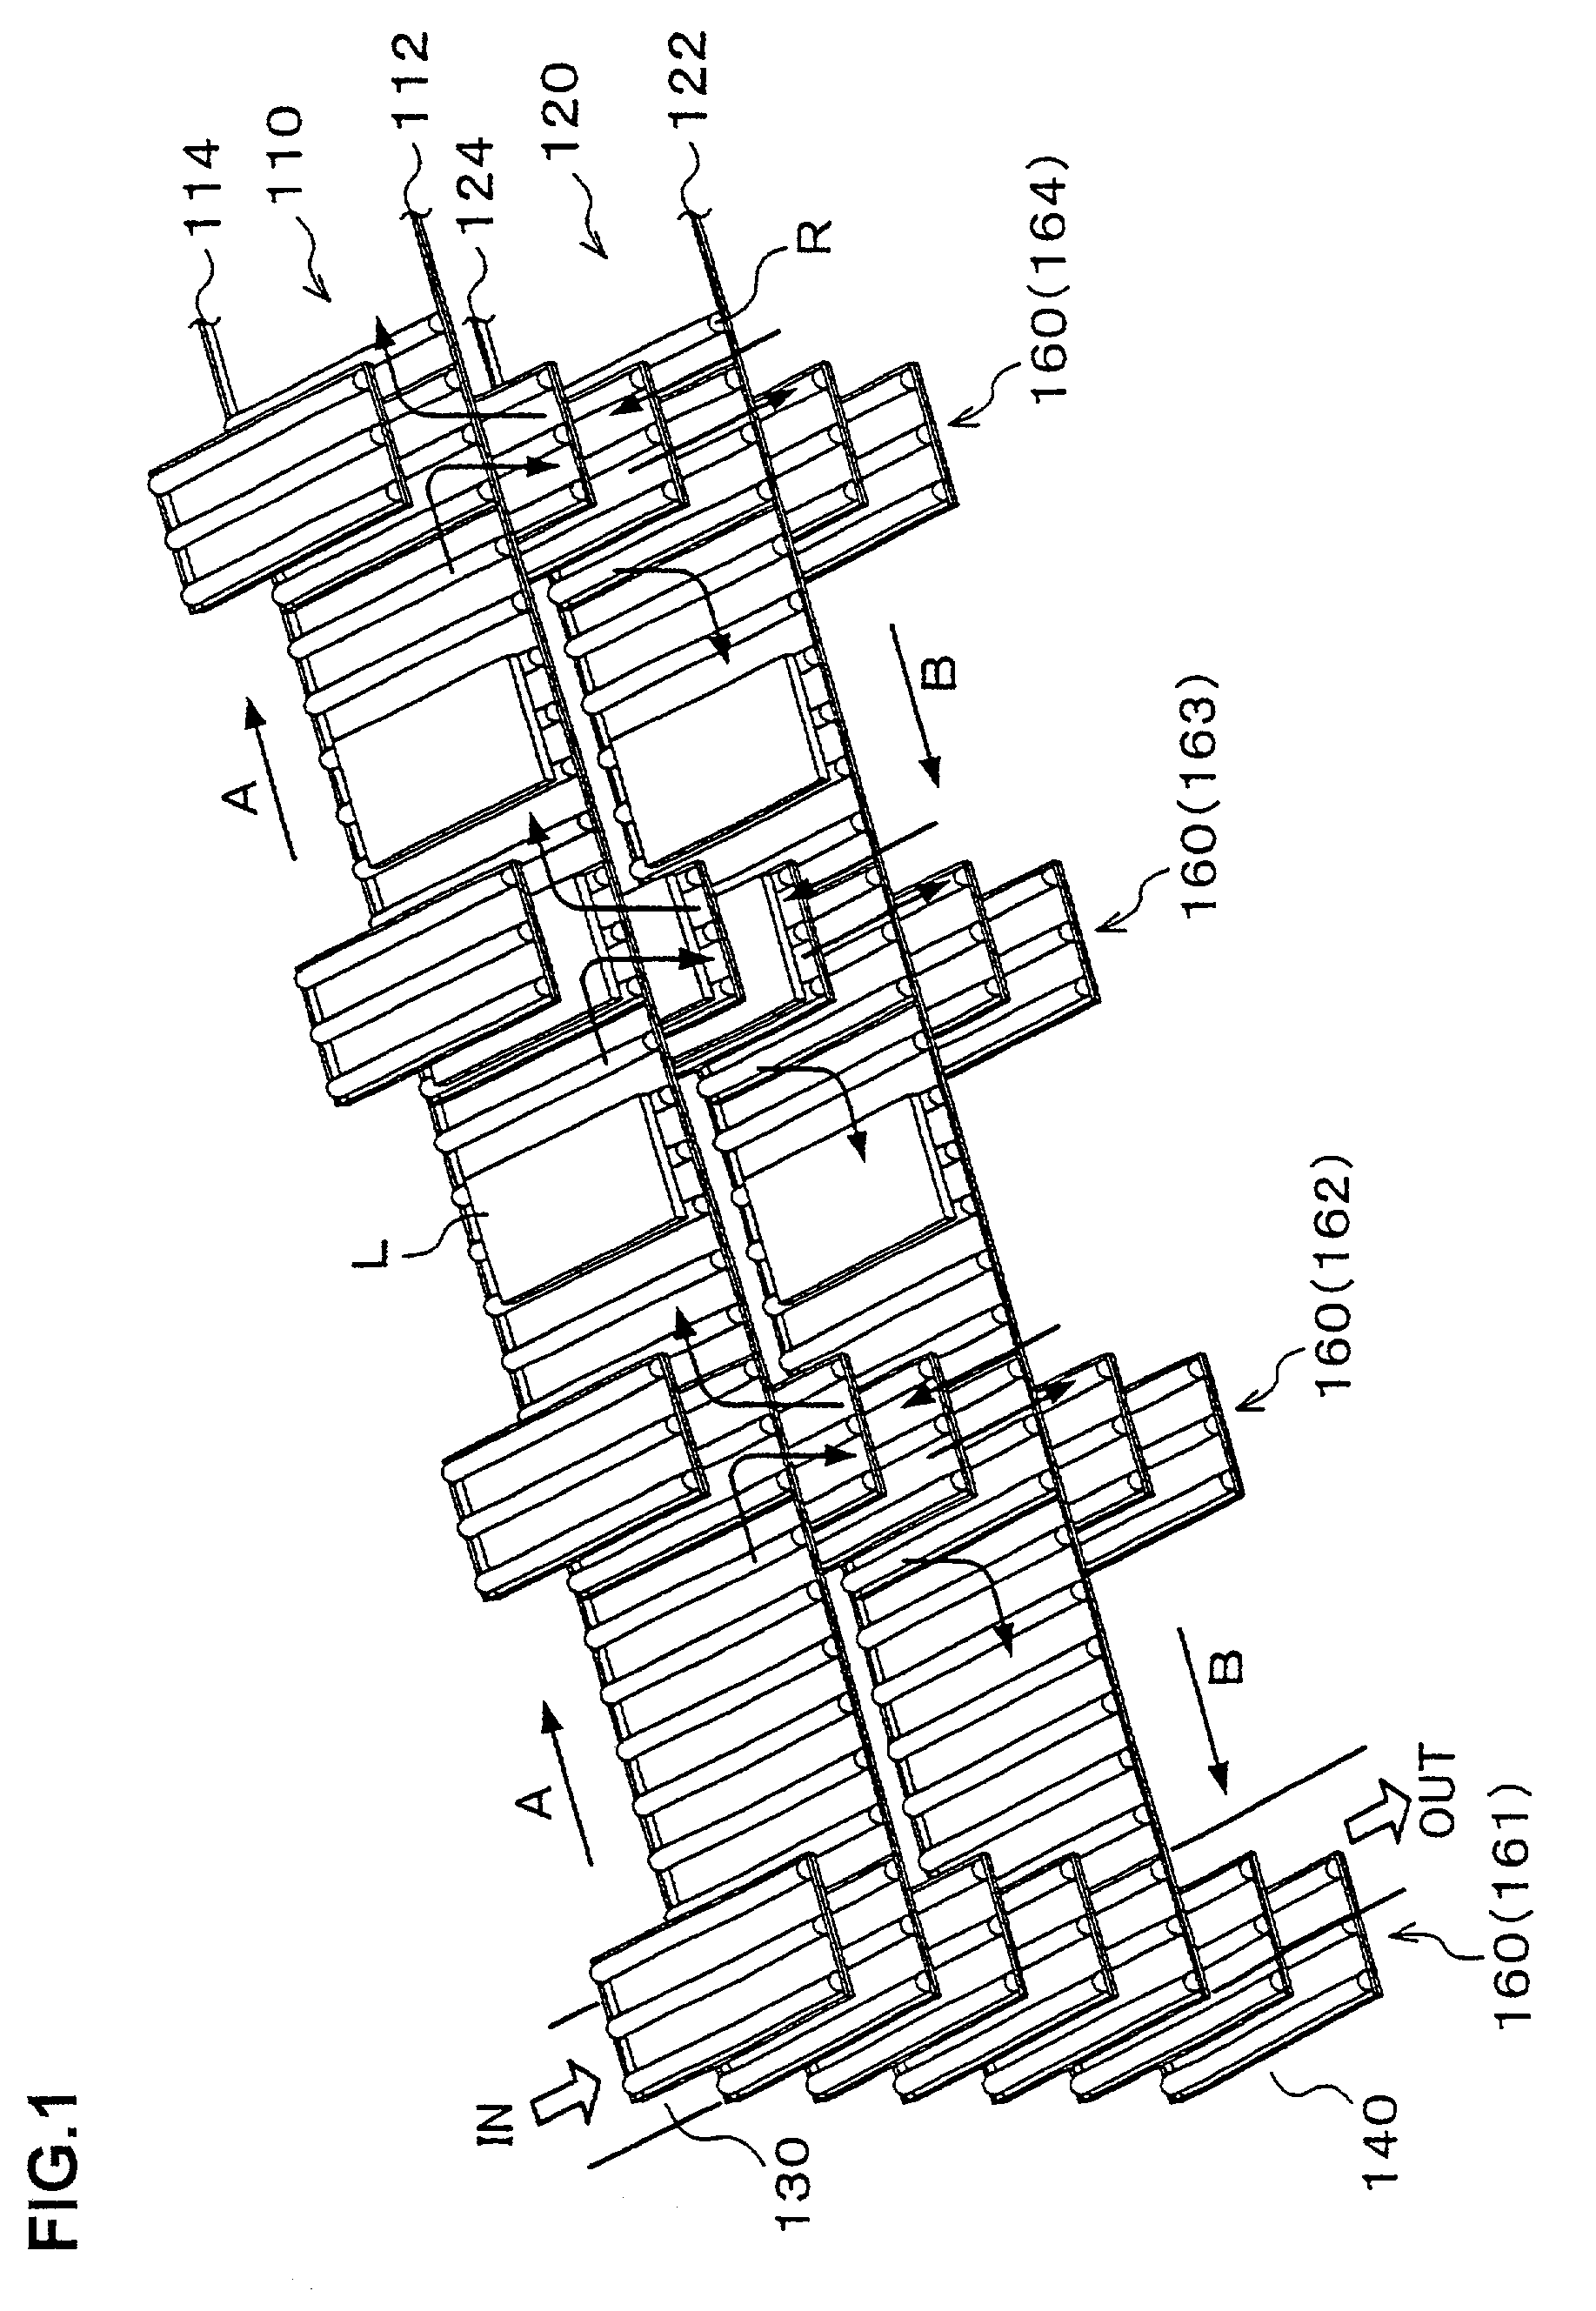 Transfer system for conveying LCD glass substrate